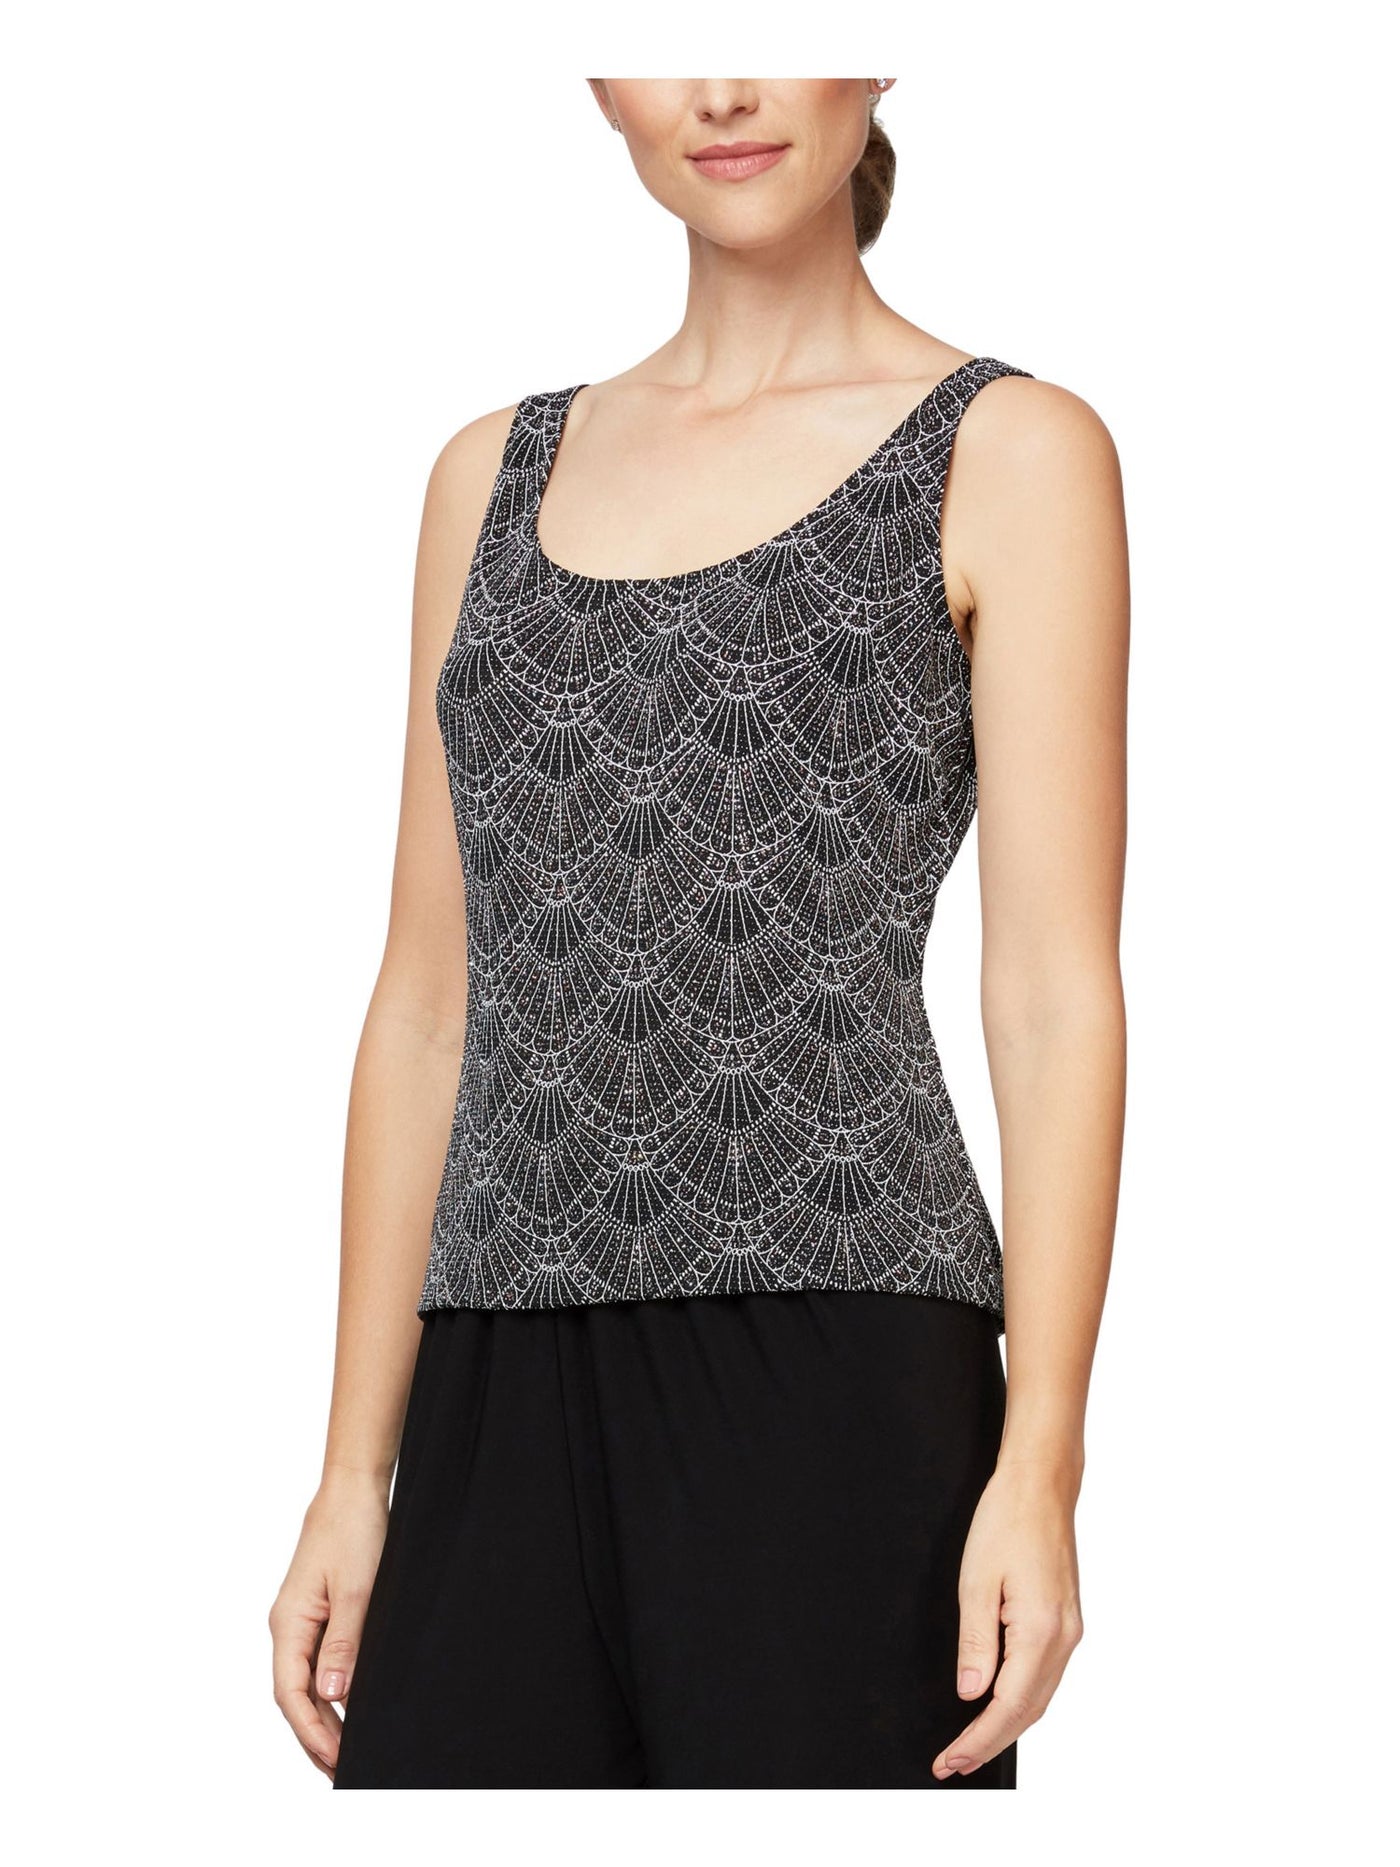 ALEX EVENINGS Womens Black Stretch Glitter Printed Sleeveless Scoop Neck Party Tank Top S